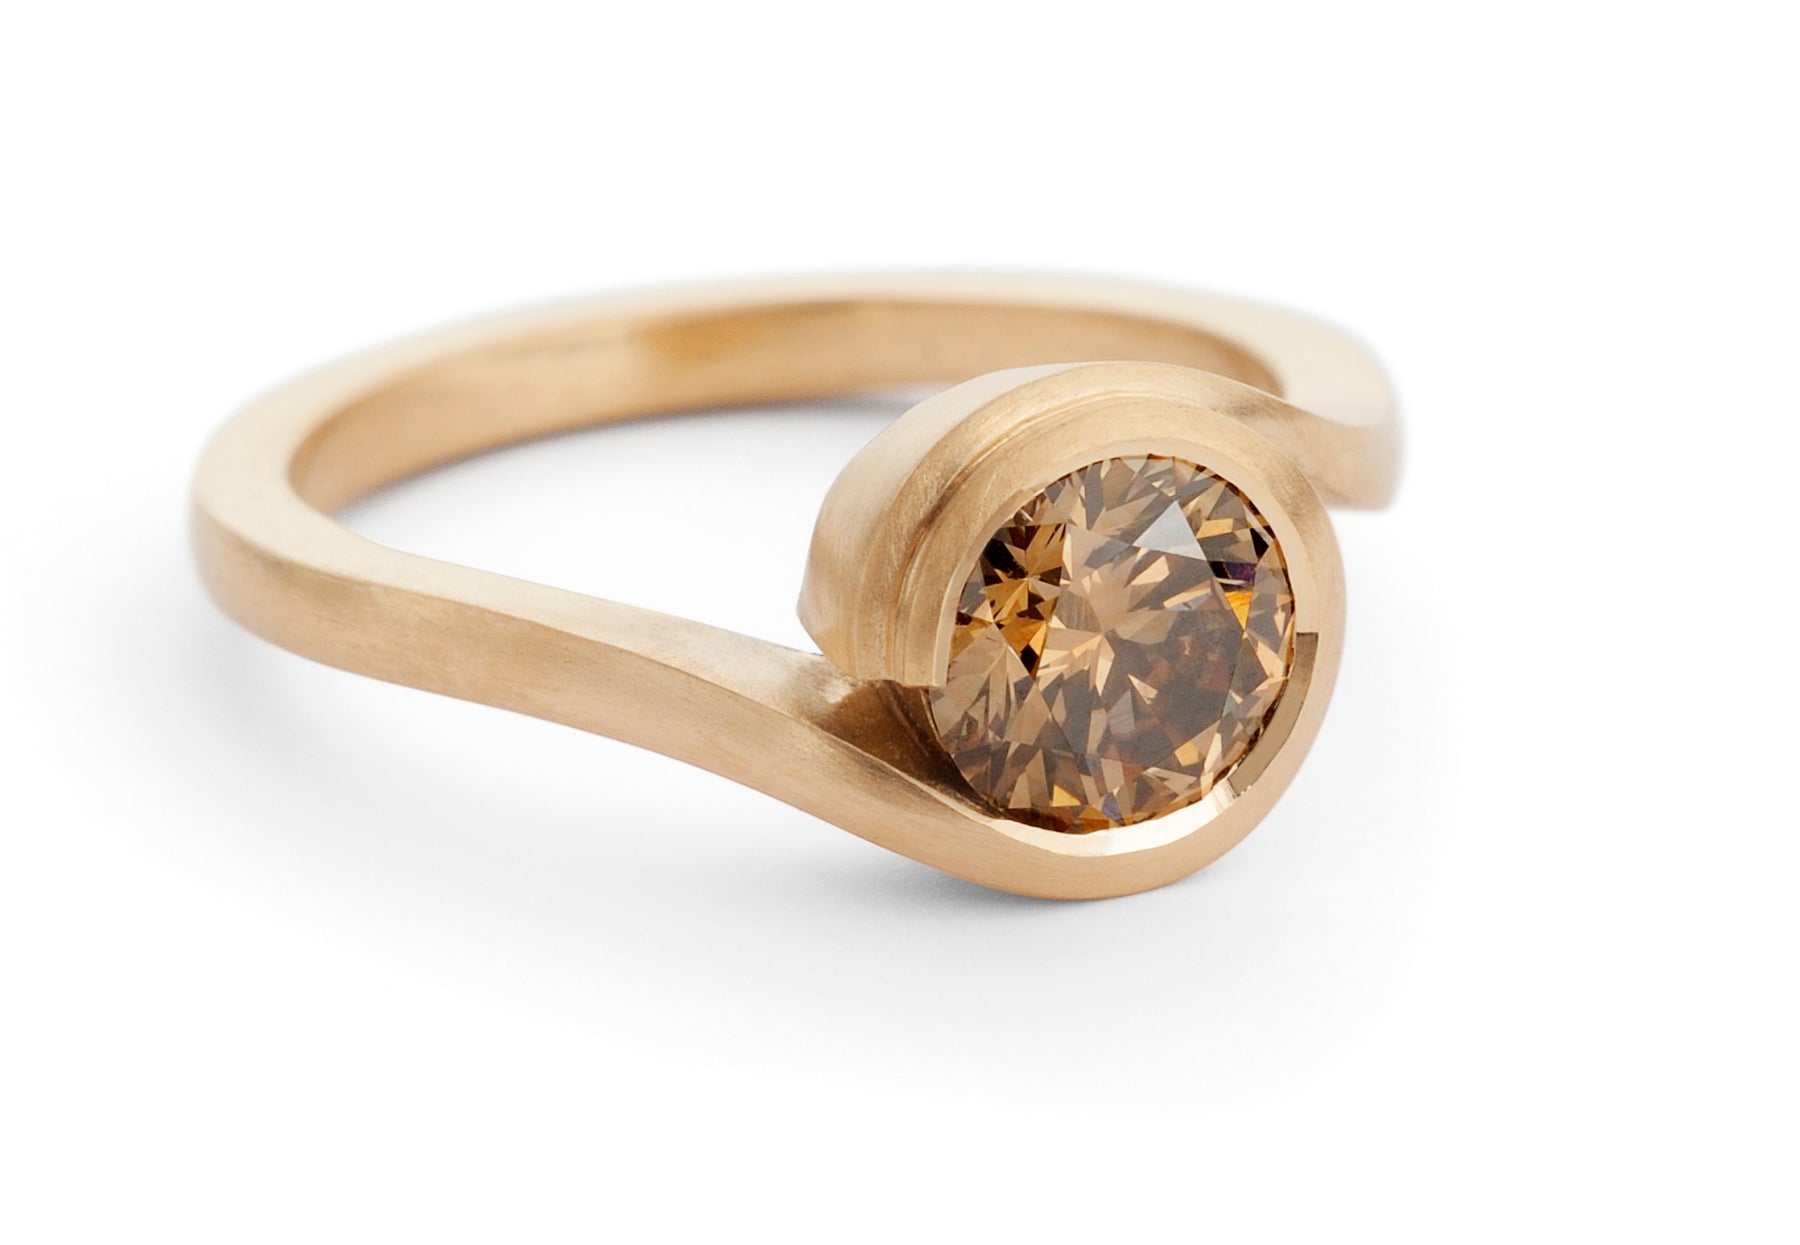 “Wave” rose gold engagement ring with cognac diamond